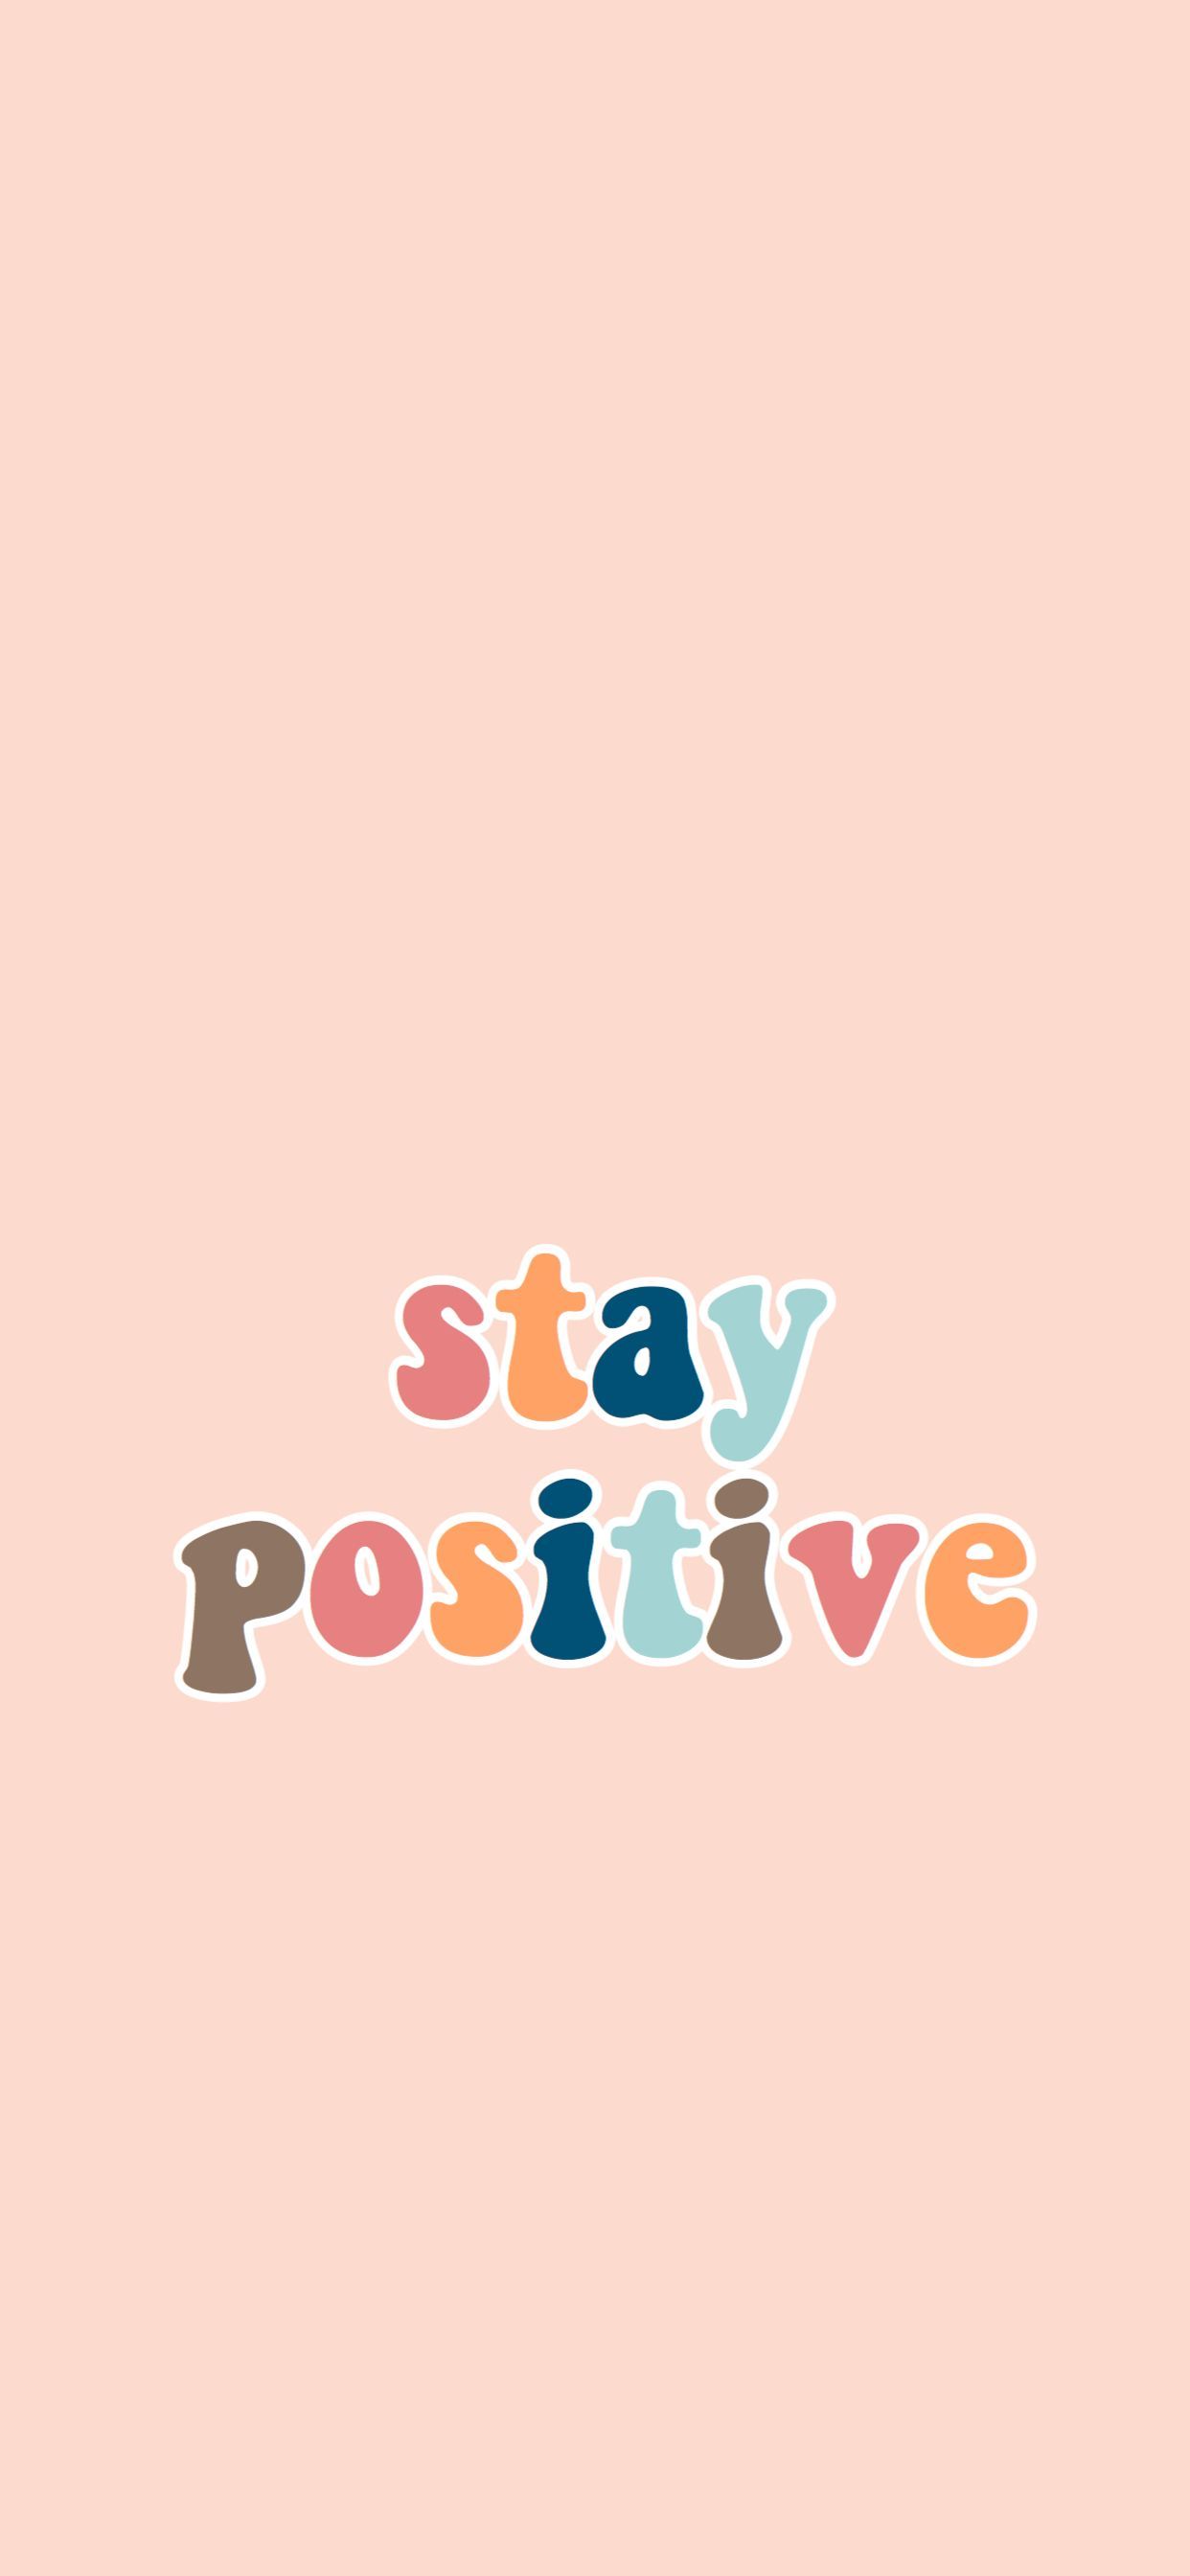 stay positive wallpaper background iphone XS max. Positive wallpaper, iPhone background, Positive background